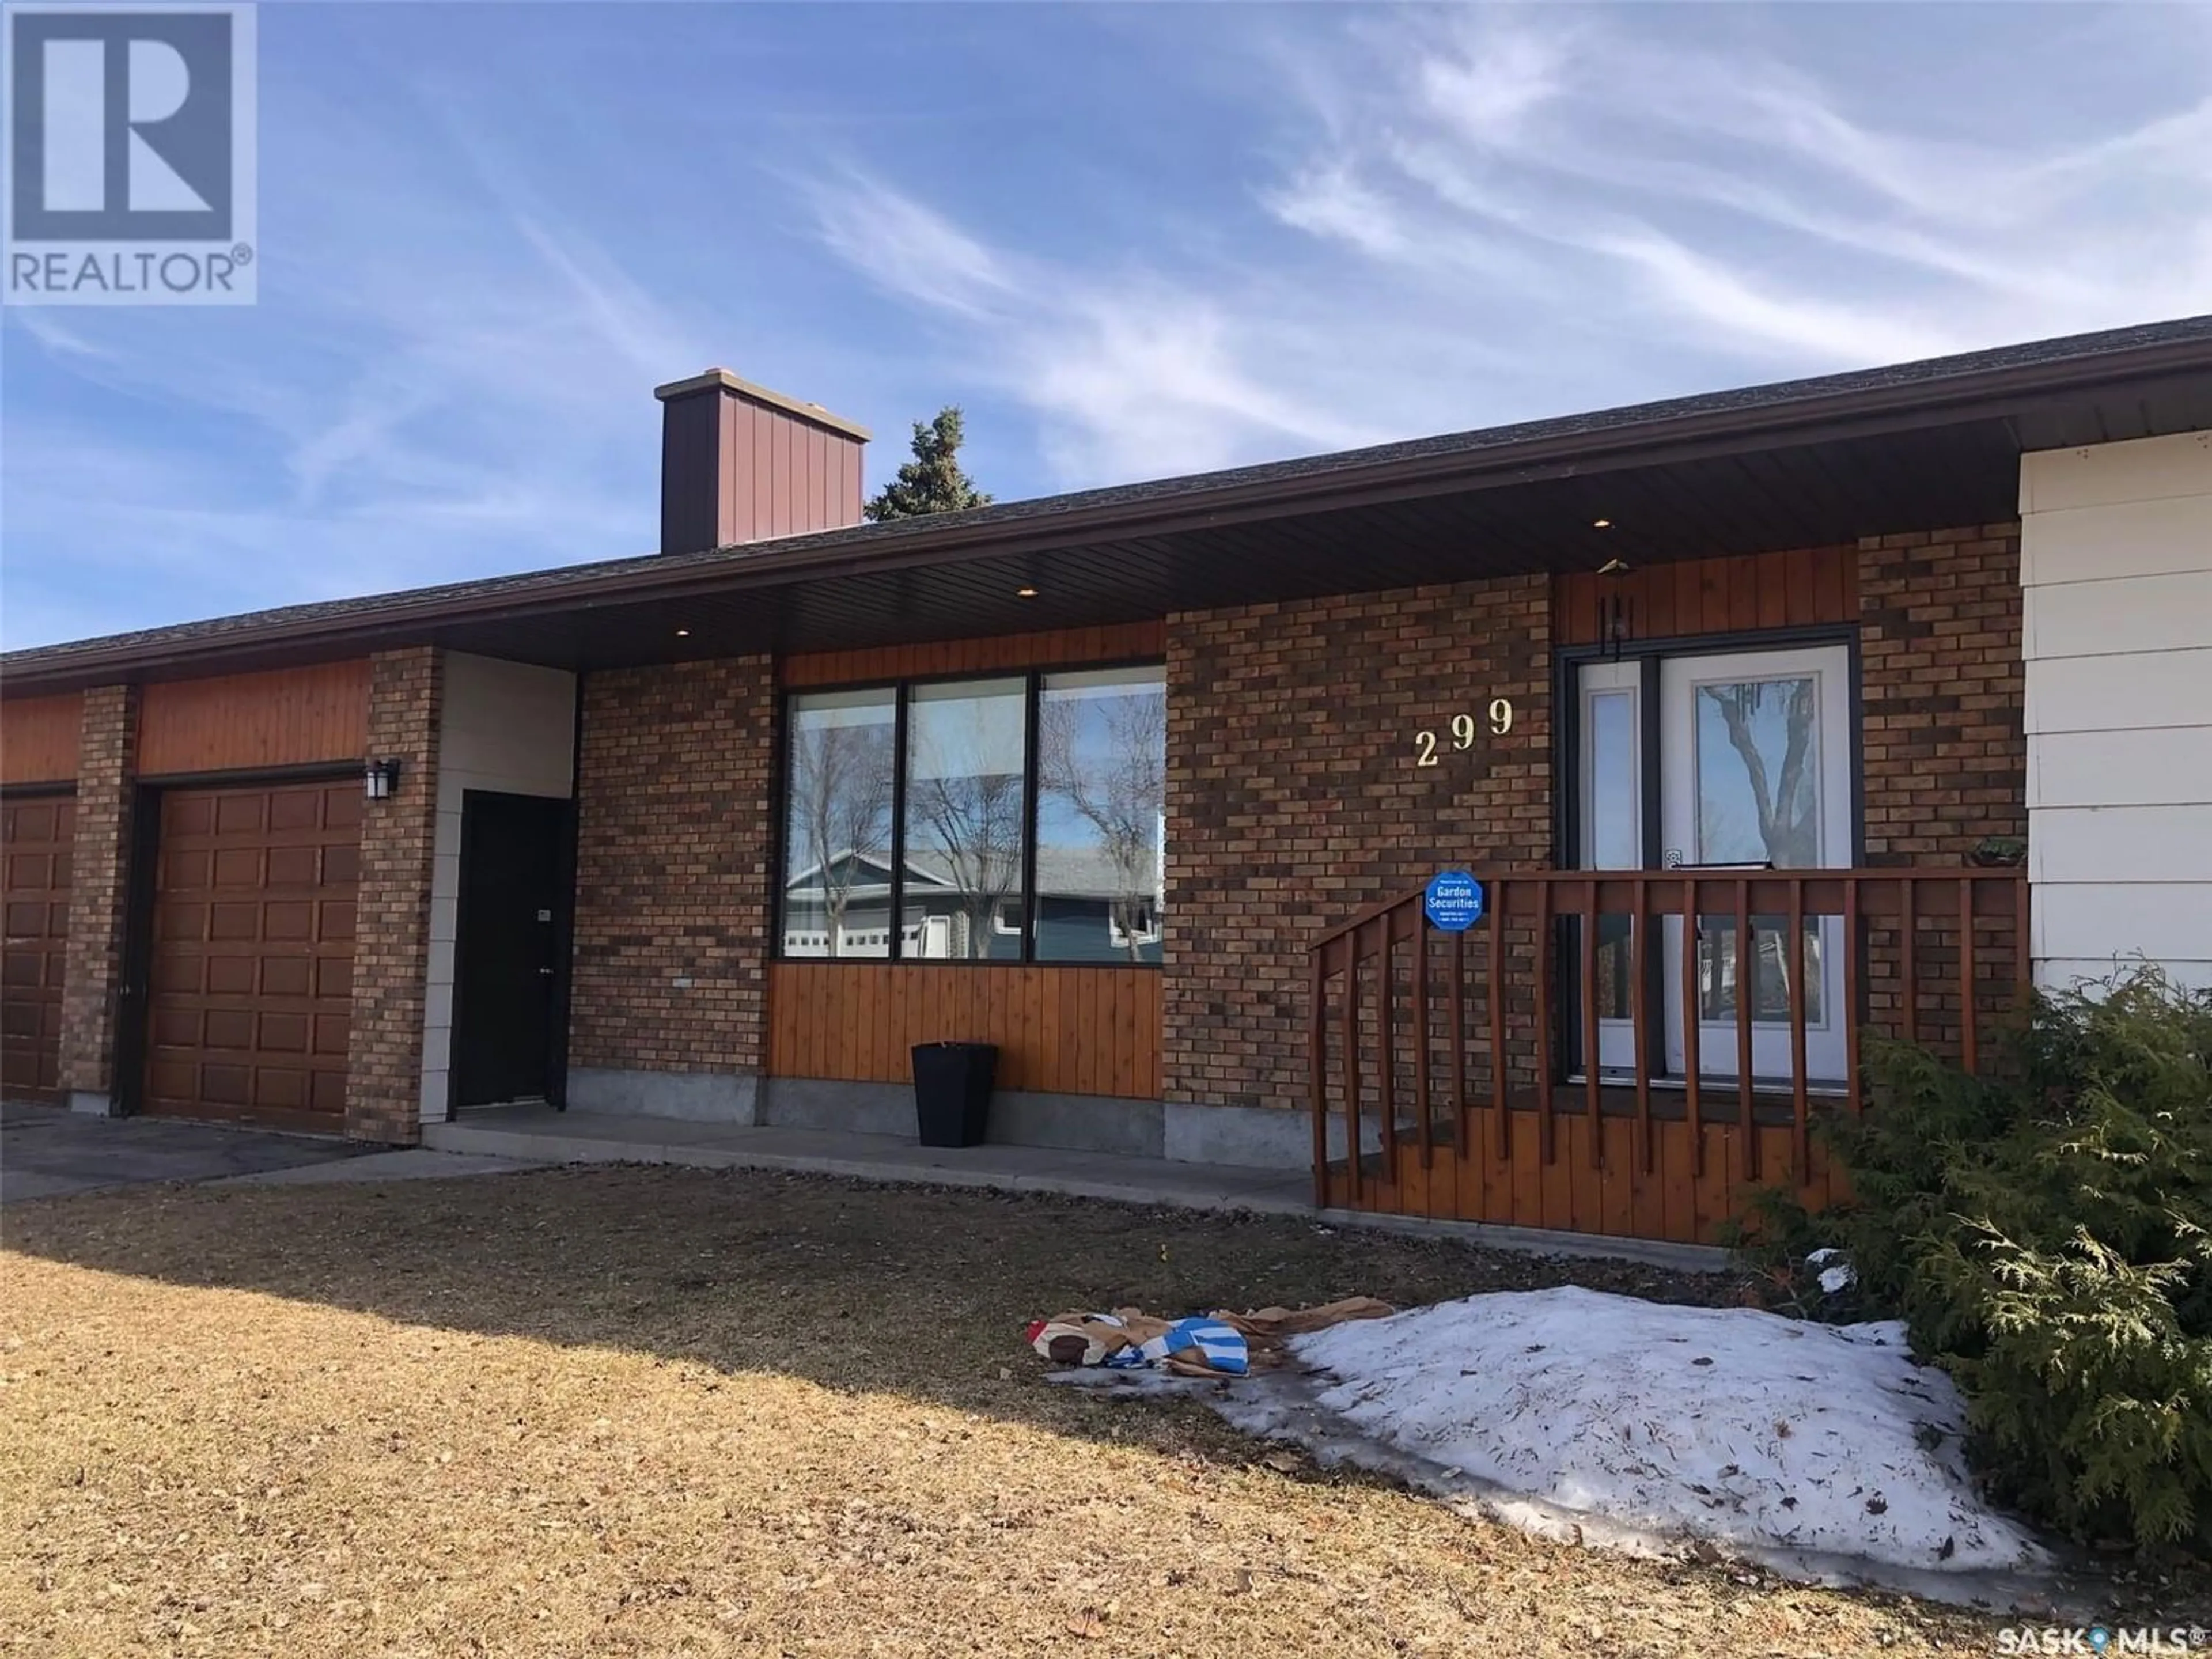 Home with brick exterior material for 299 Parker CRESCENT, Canora Saskatchewan S0A0L0